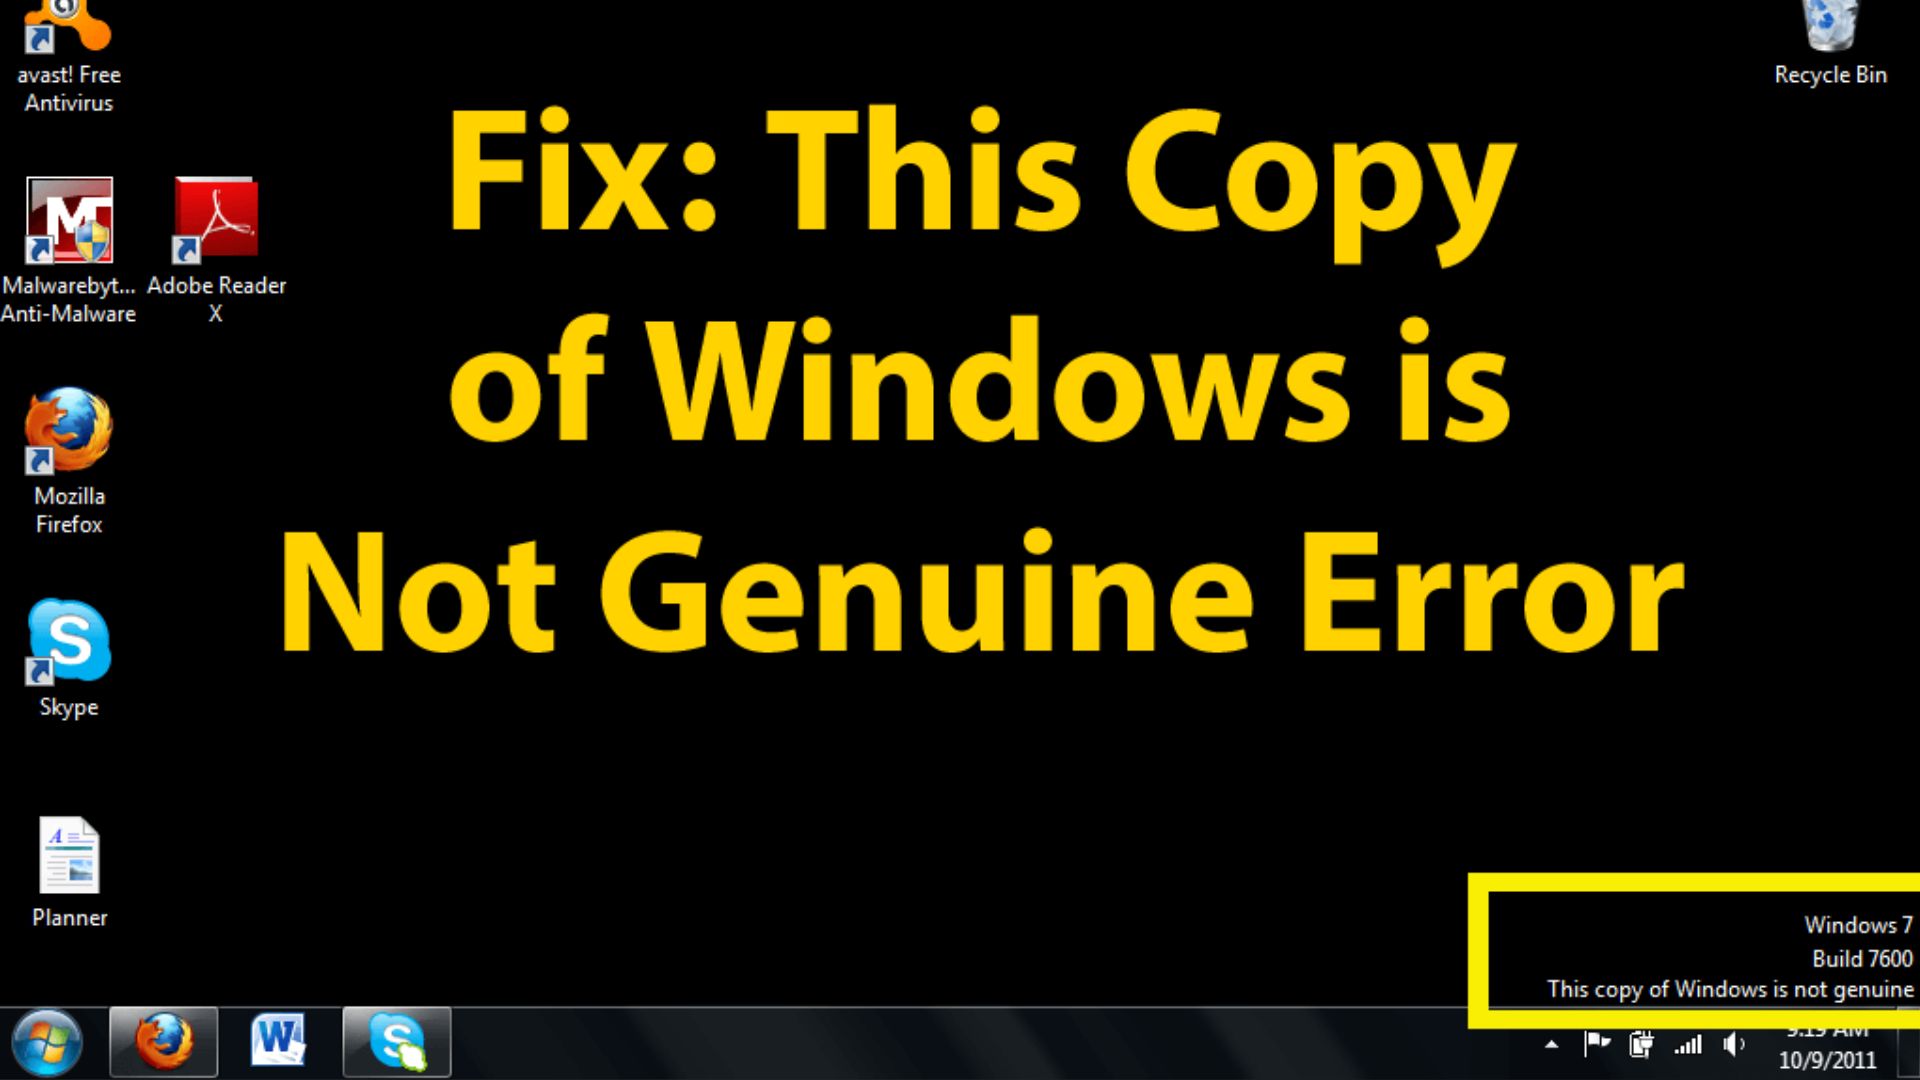 remove windows 7 build 7601 this copy is not genuine